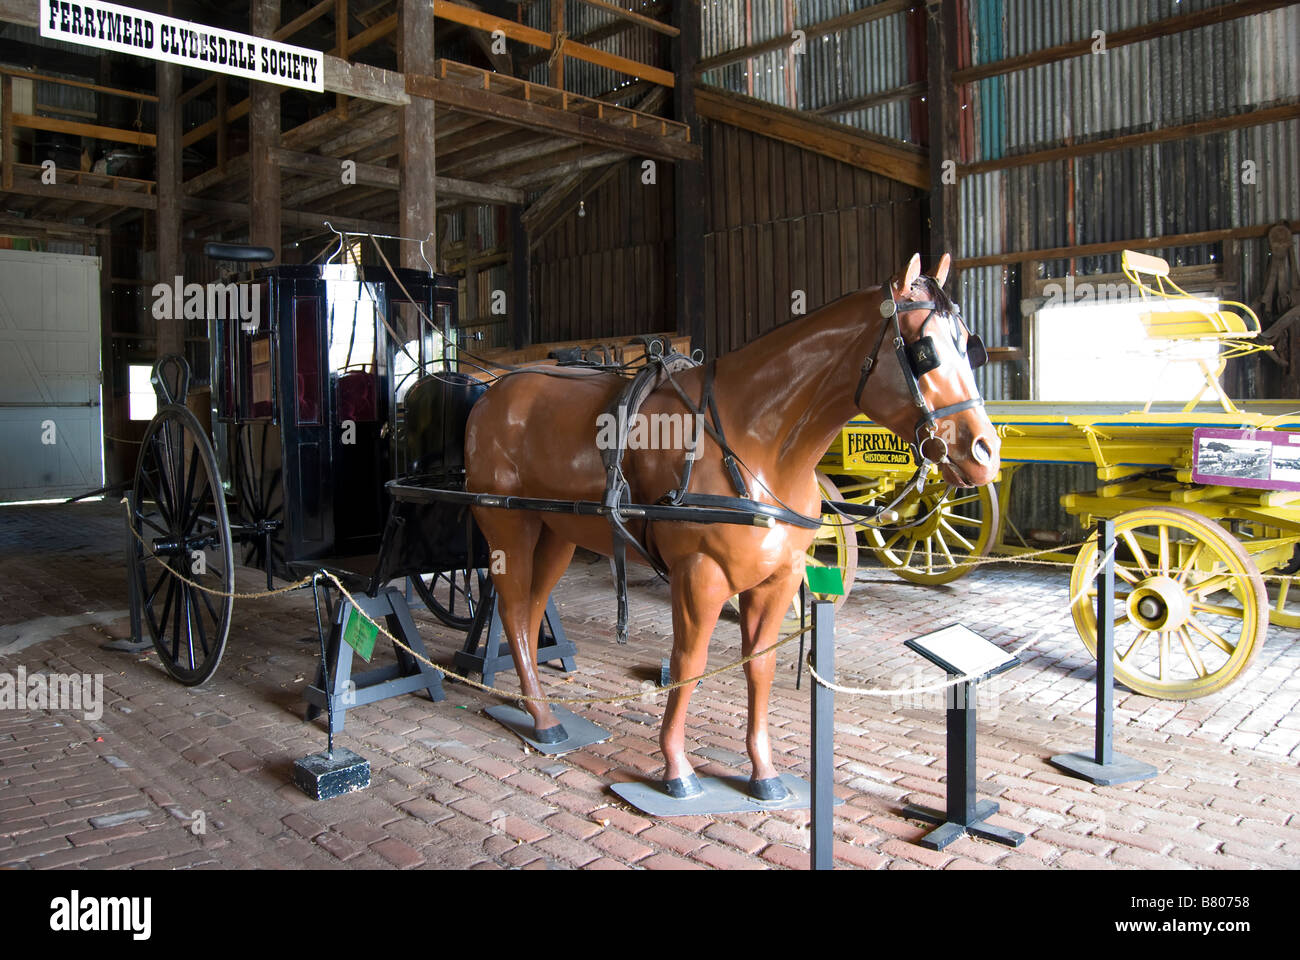 Horse stables, Ferrymead Heritage Park, Ferrymead, Christchurch, Canterbury, New Zealand Stock Photo